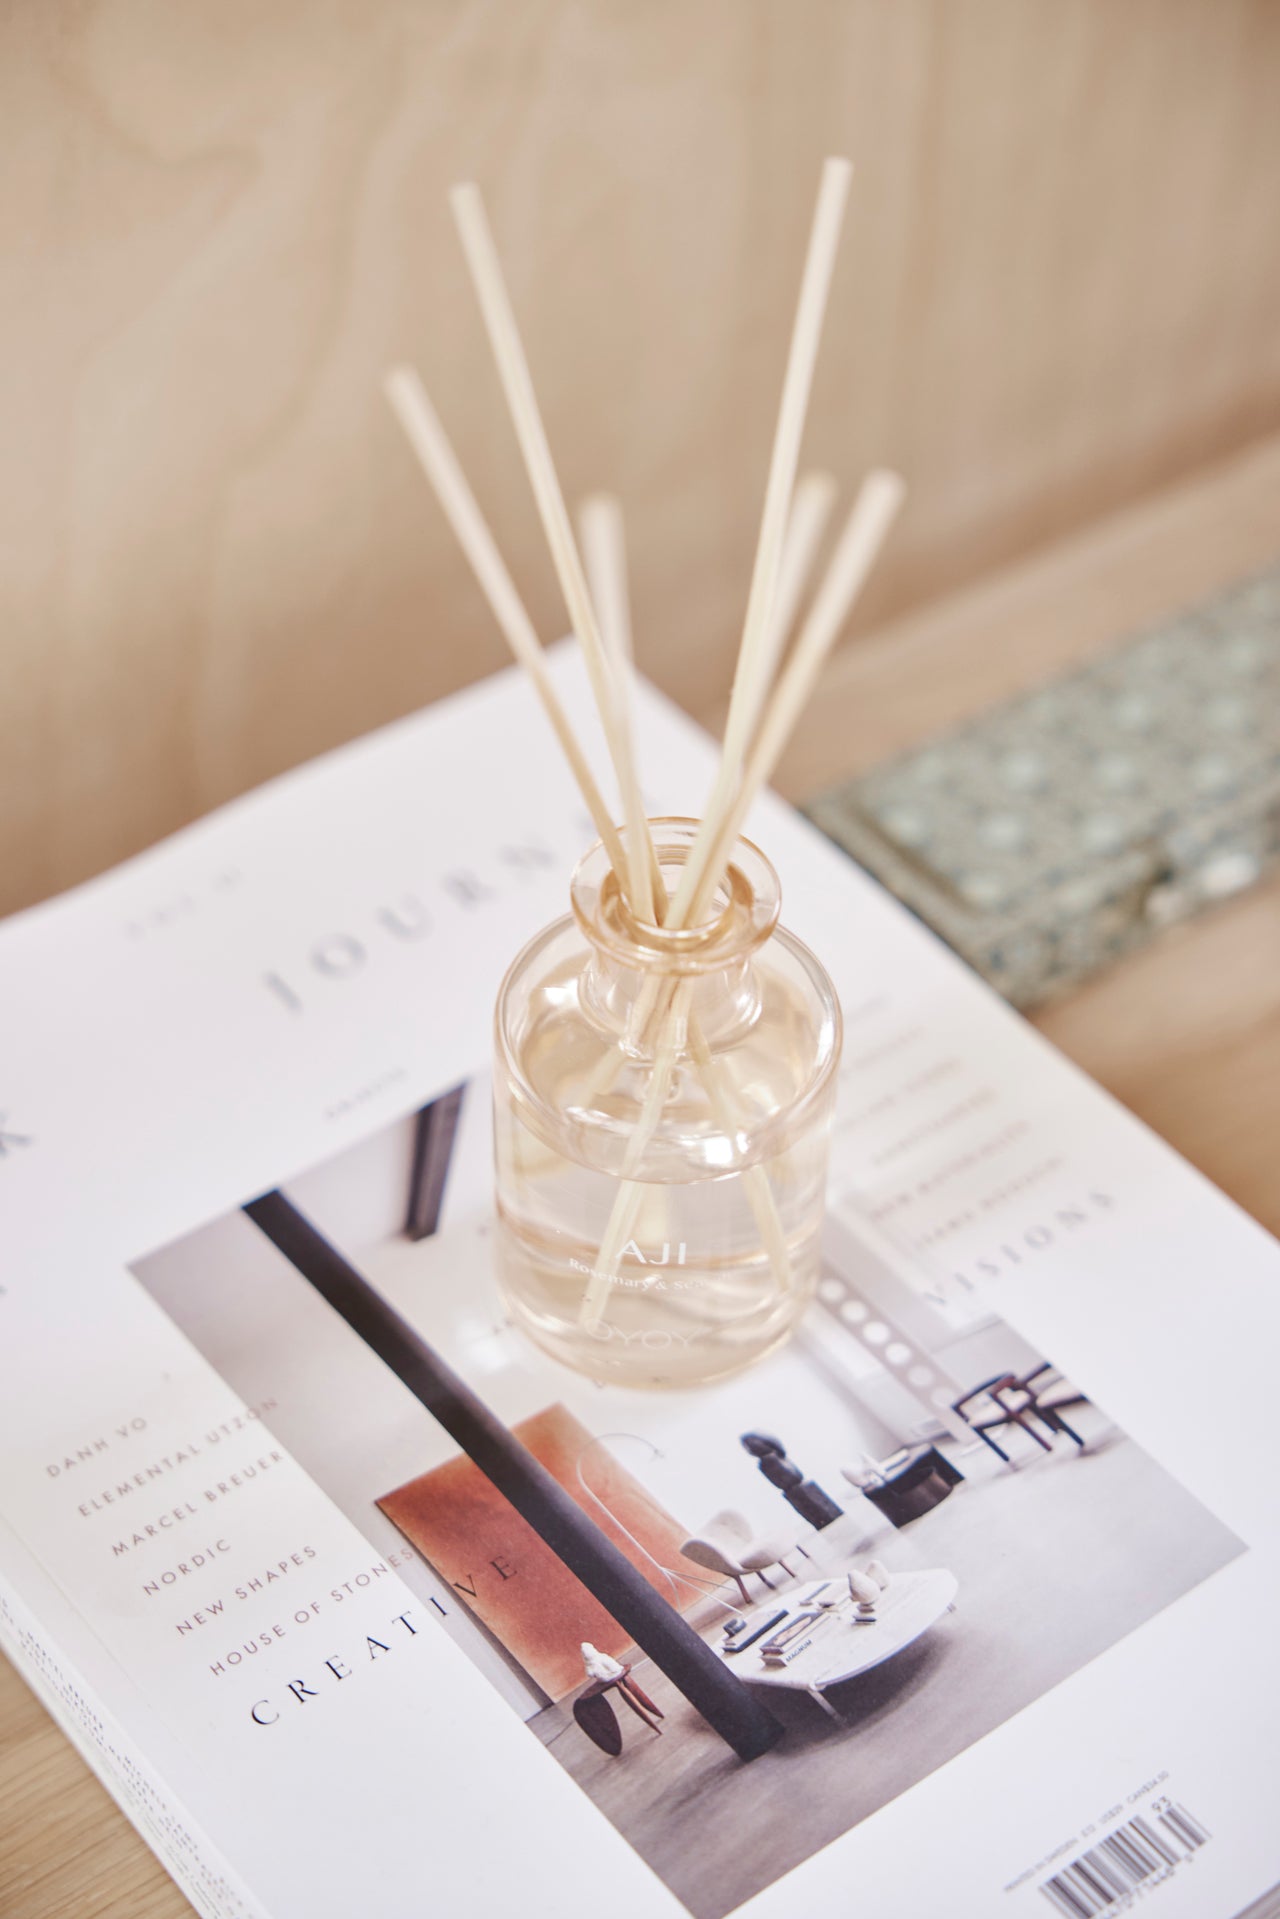 Load image into Gallery viewer, Aji Fragrance Diffuser
